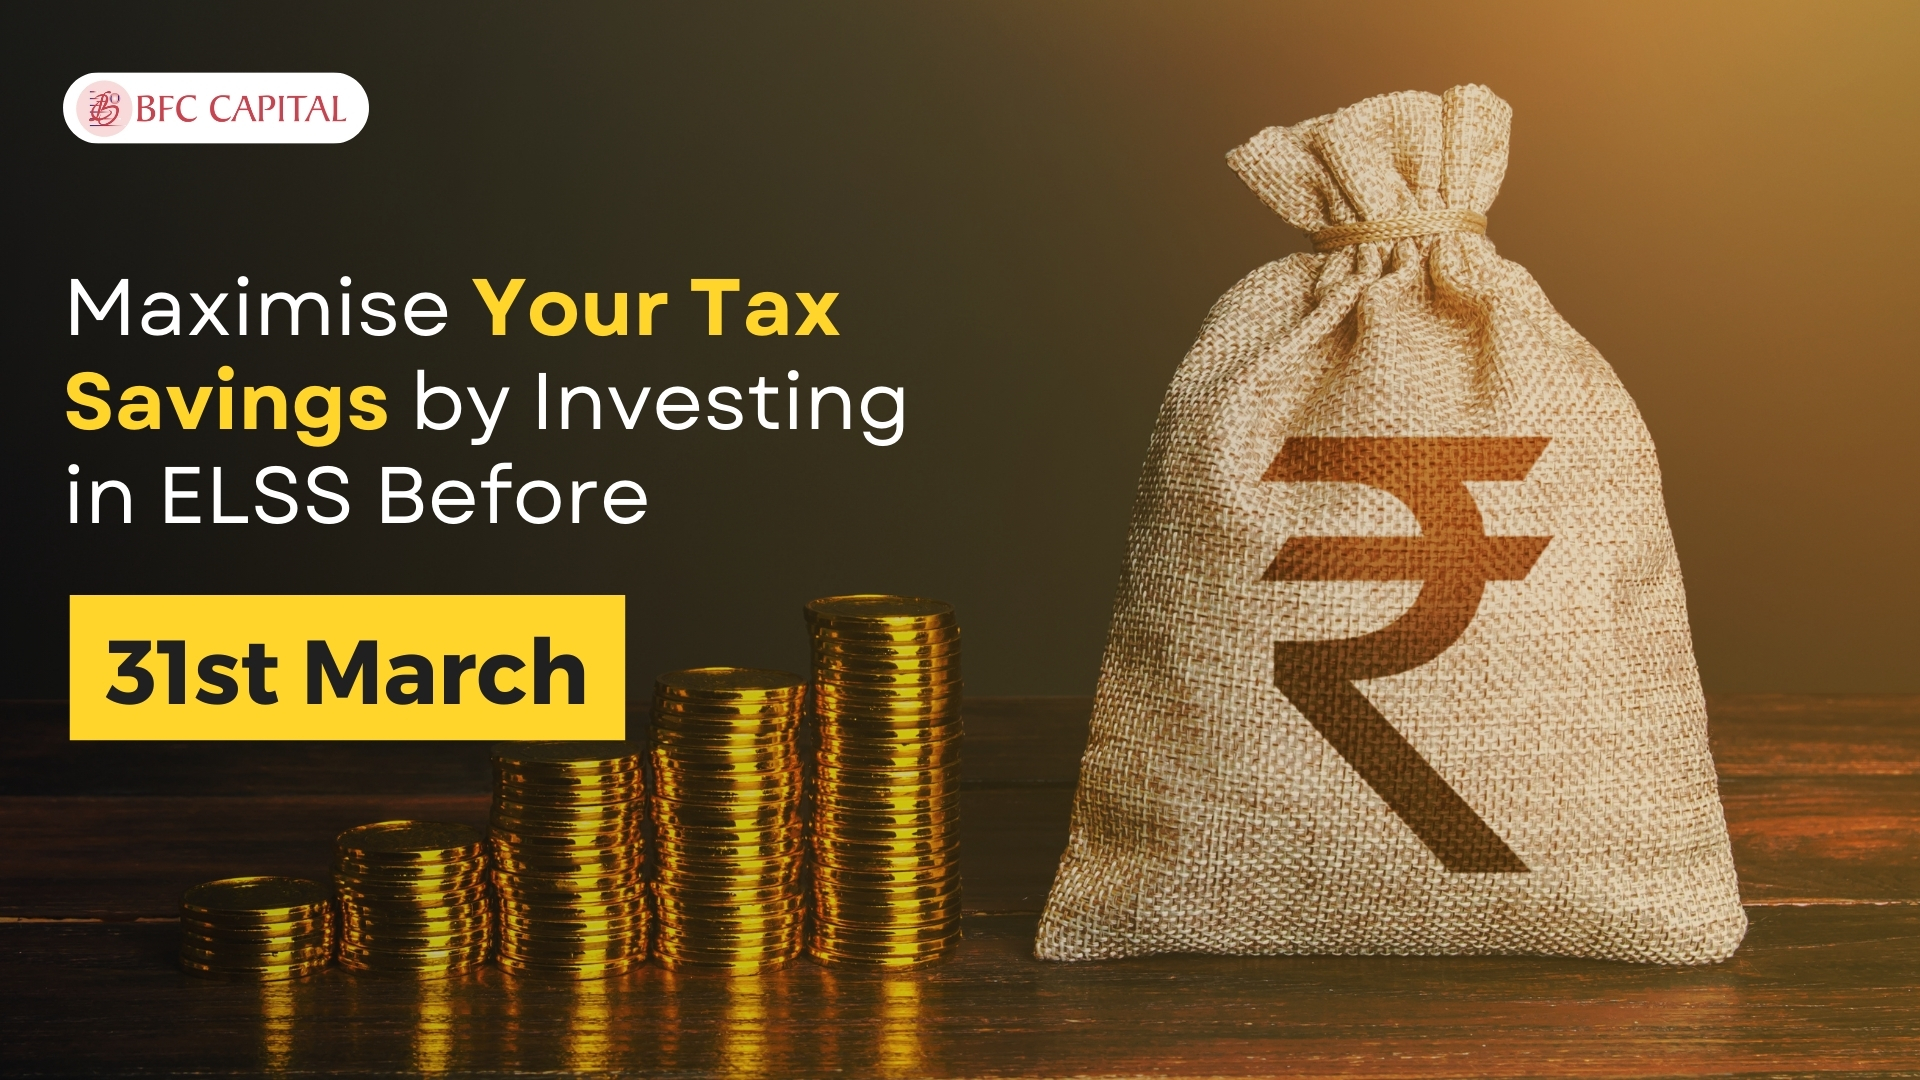 Maximise Your Tax Savings by Investing in ELSS Before 31st March